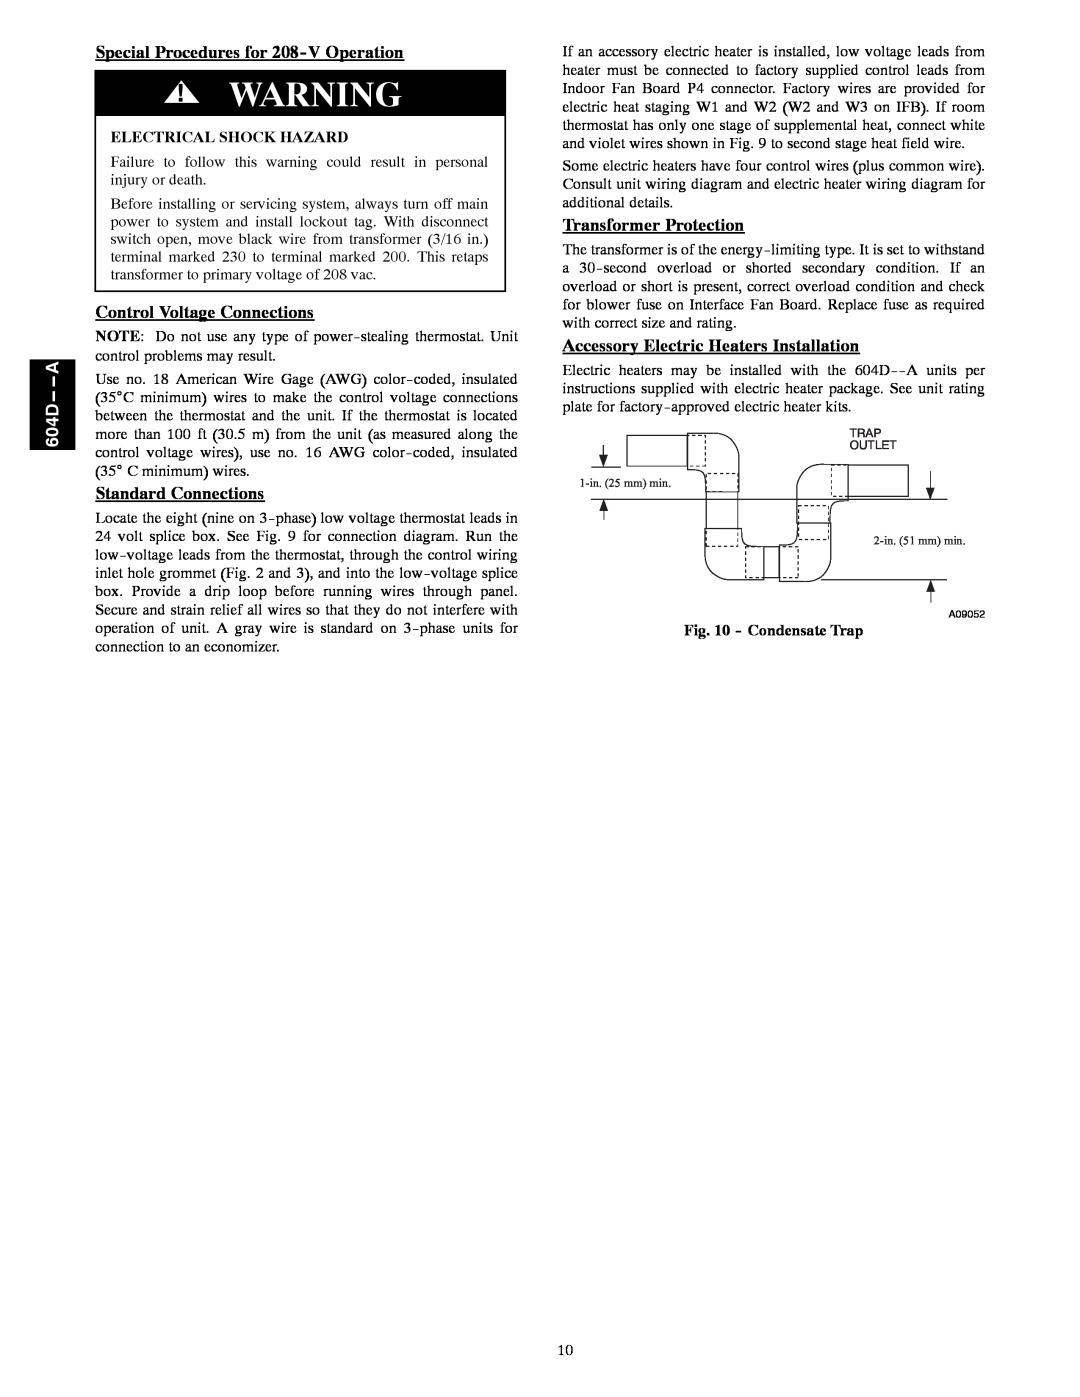 Bryant 604D--A Special Procedures for 208-VOperation, Control Voltage Connections, Standard Connections, Condensate Trap 